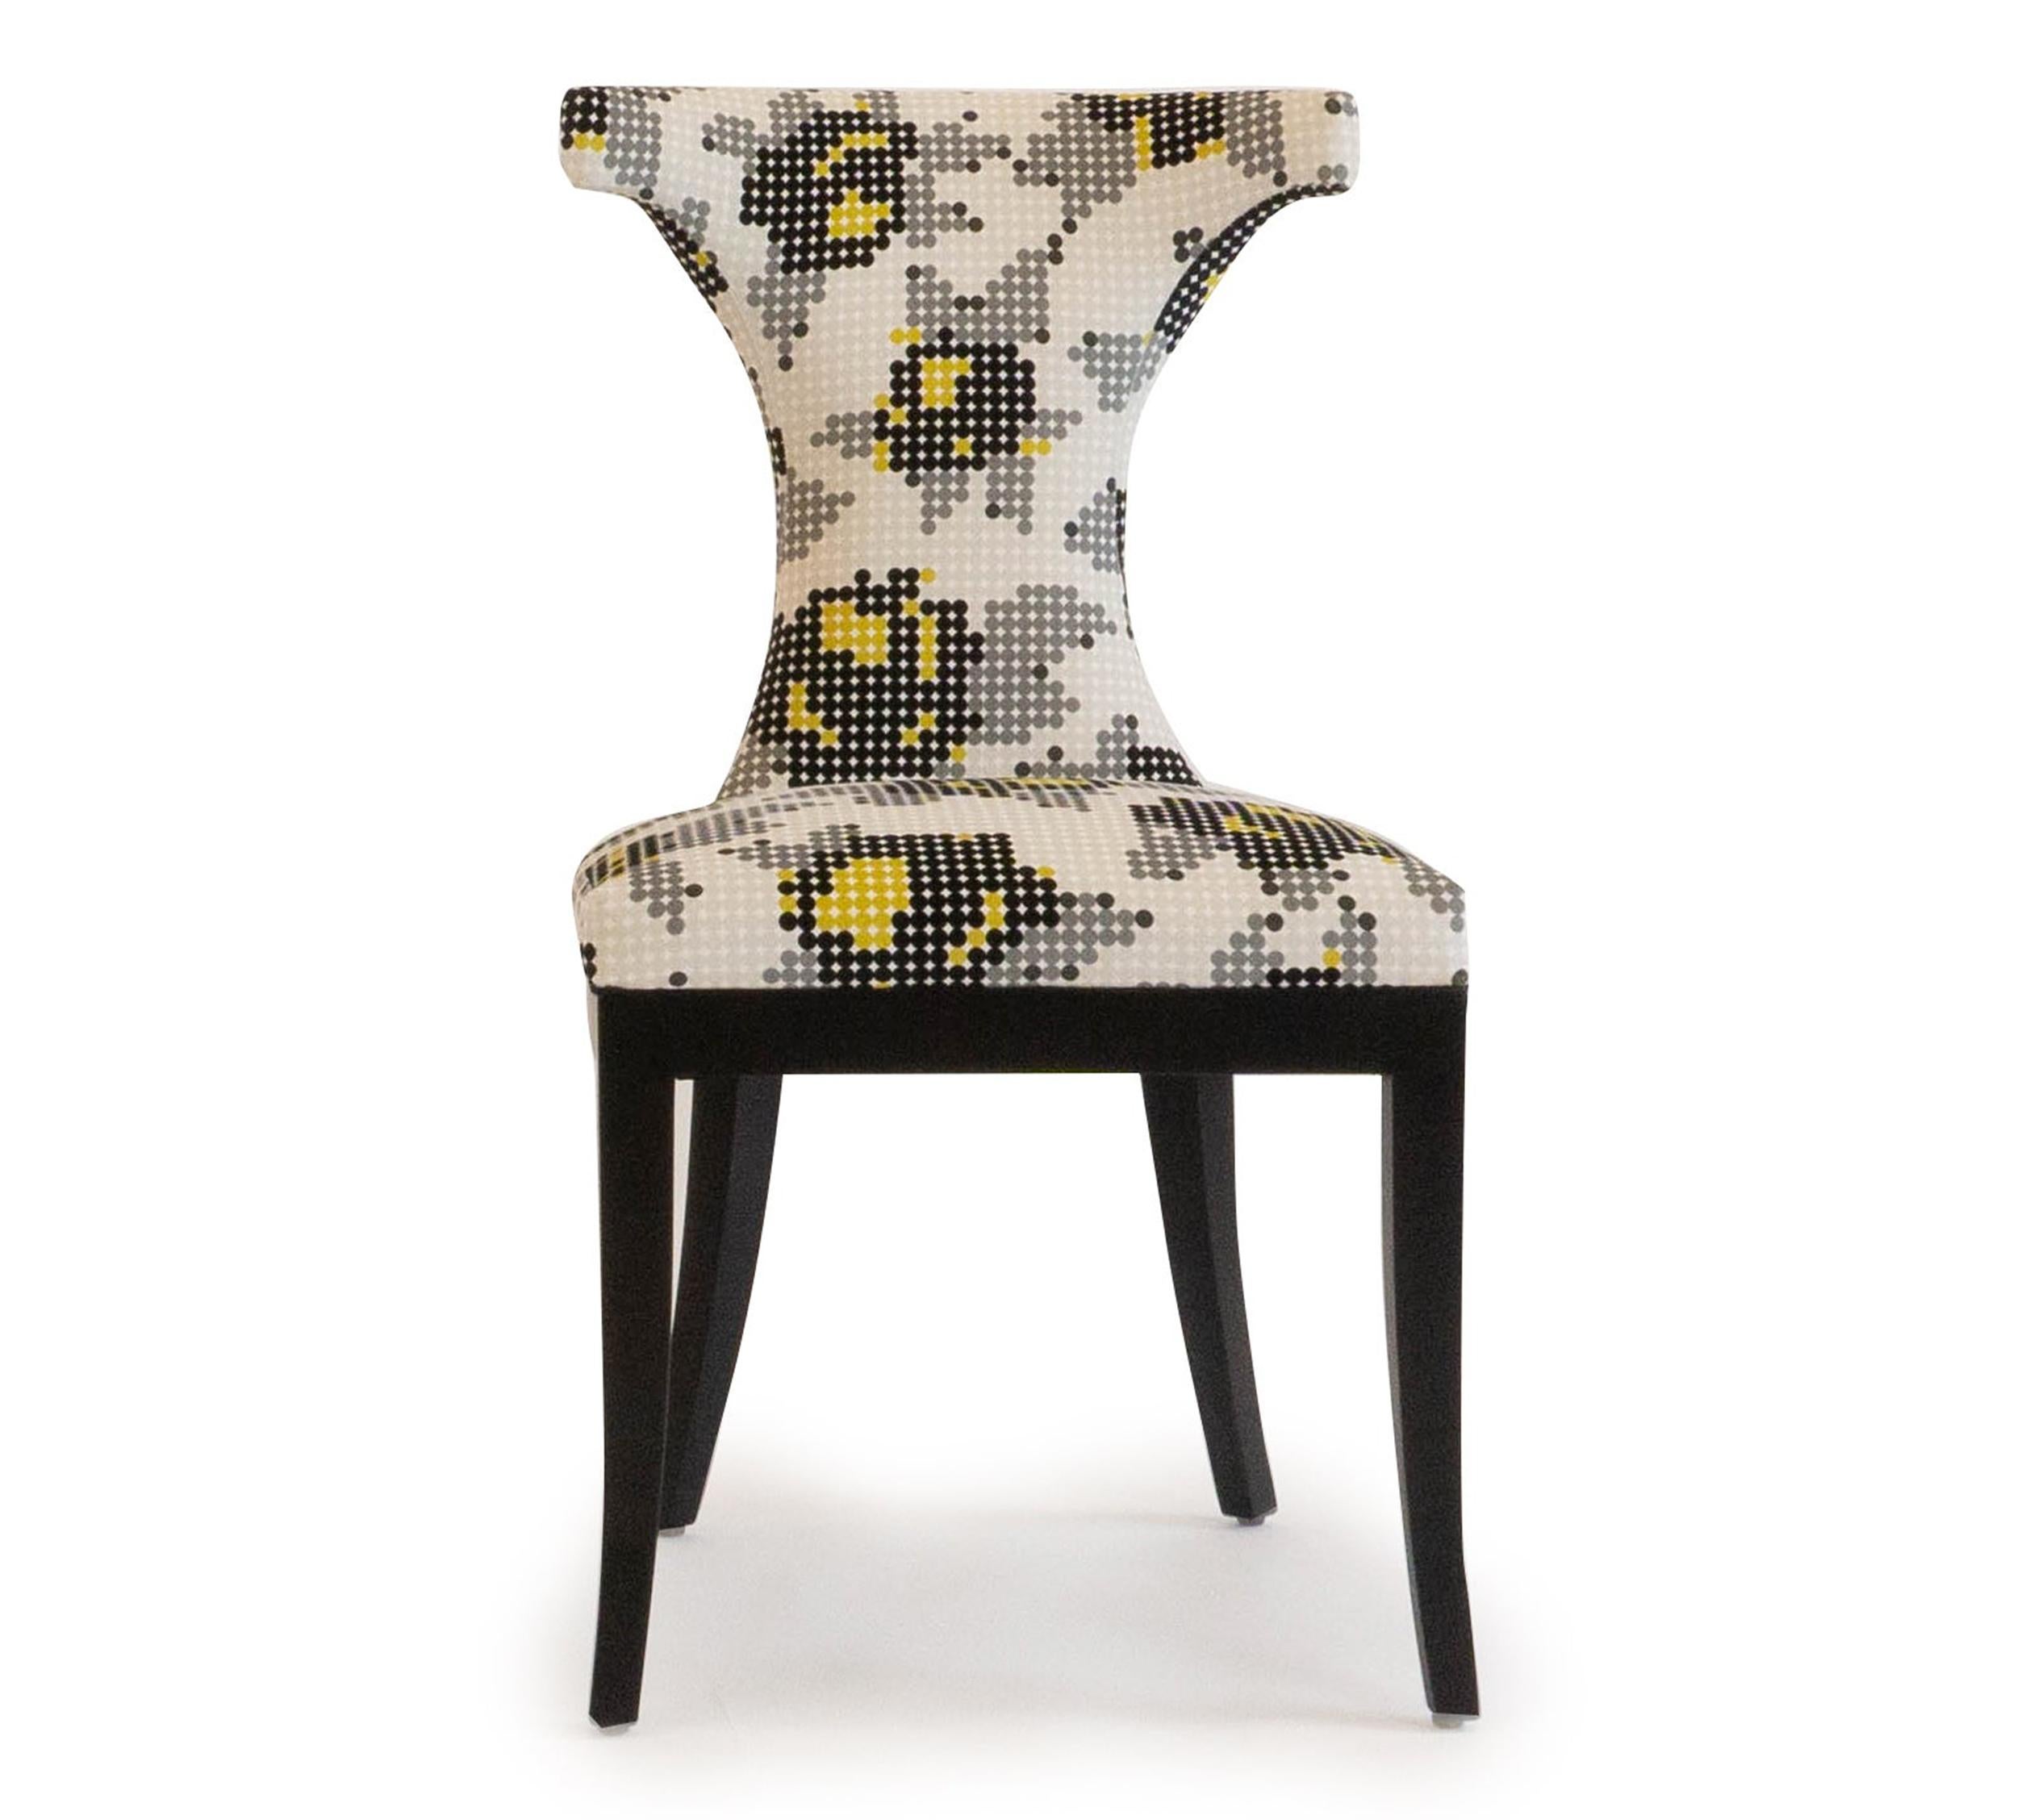 This dining chair has a timeless profile and features added lumbar padding for comfort. Shown in Romo Peg Art Roses with a maple frame in black painted finish. This chair is completely customizable and can be remade as shown or with the customers’